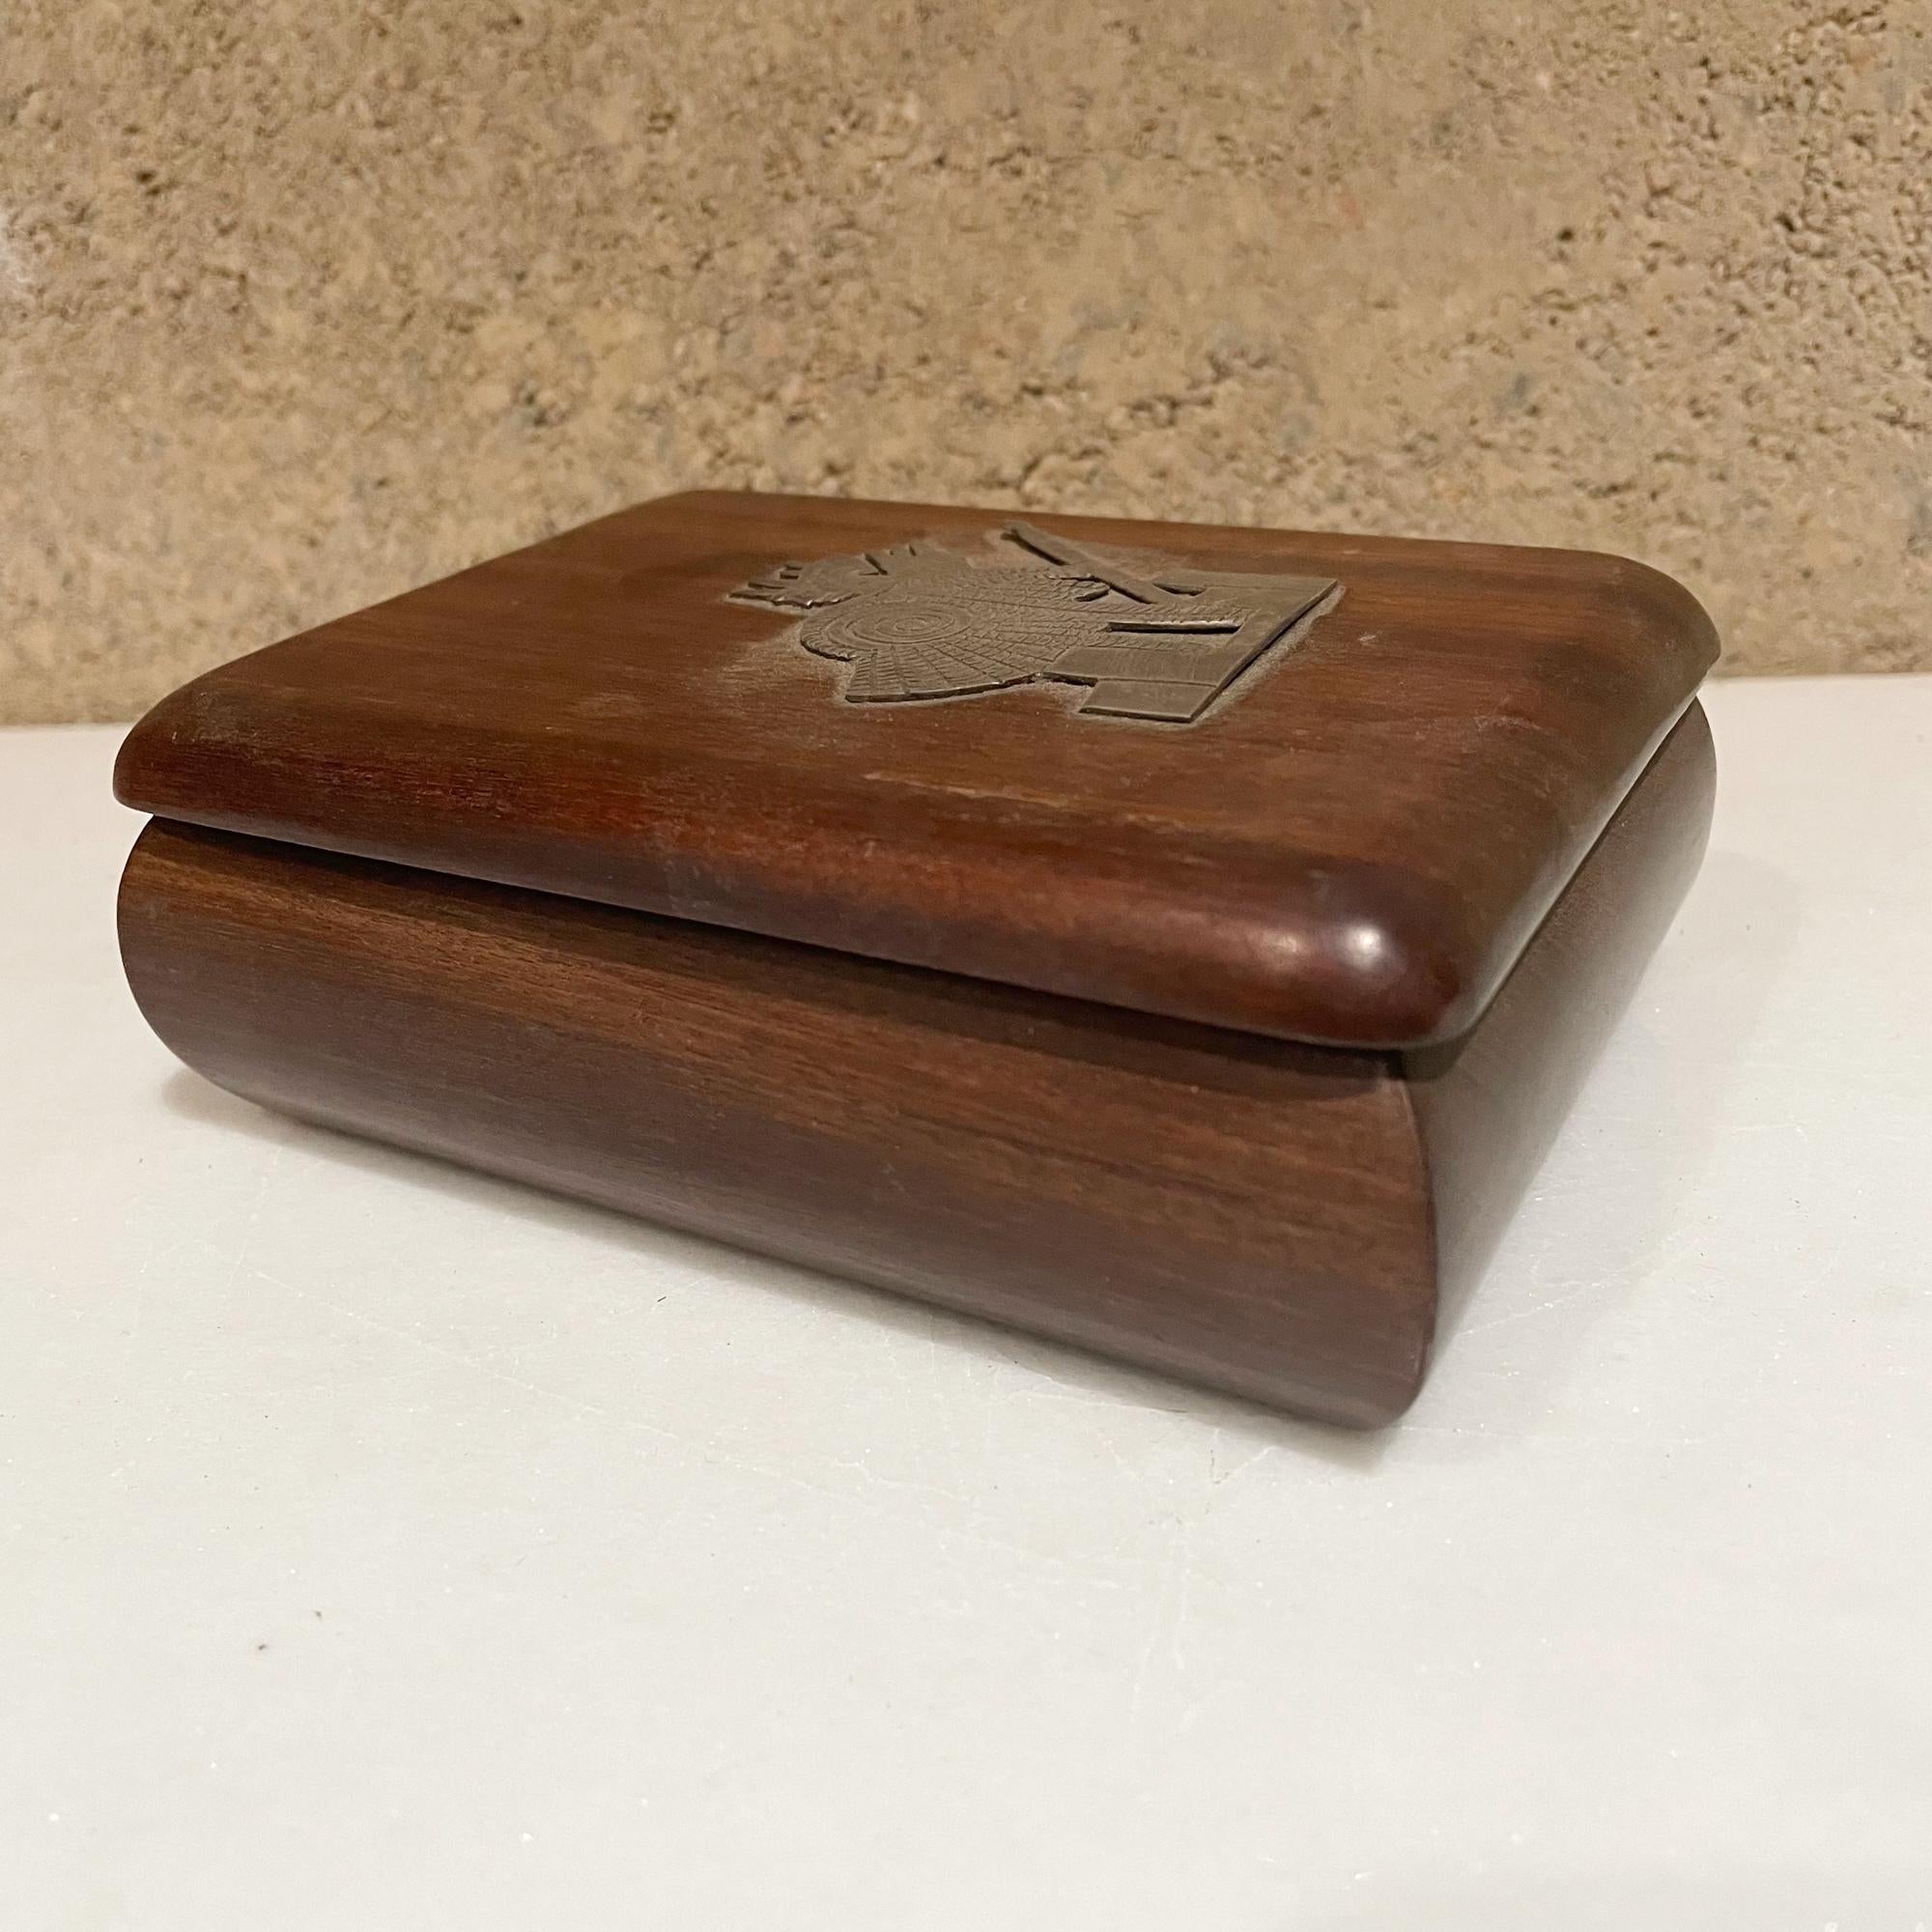 Box
From Mexico small wood jewelry keepsake box hand carved in exotic Mahogany, finely crafted.
Beautifully polished with elegant curves.
Cover Lid is embellished with an emblem of a Mexican Aztec warrior, made in silver.
No signature,